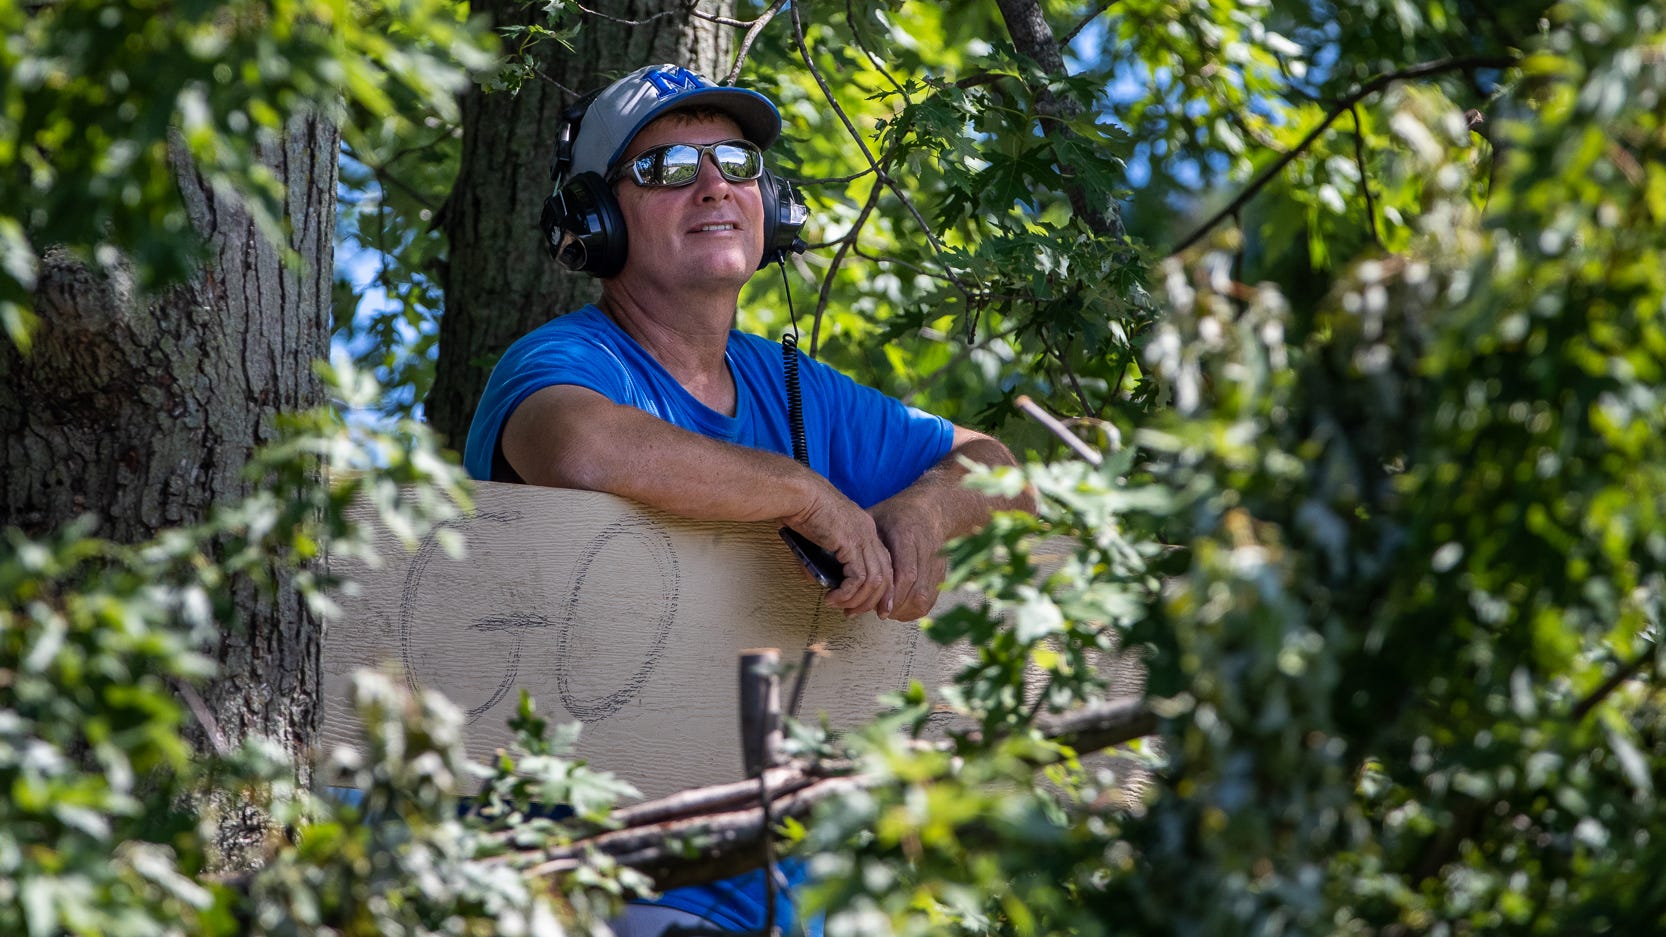   
																One fan will watch Indy 500 in person — from a tree top overlooking the track 
															 